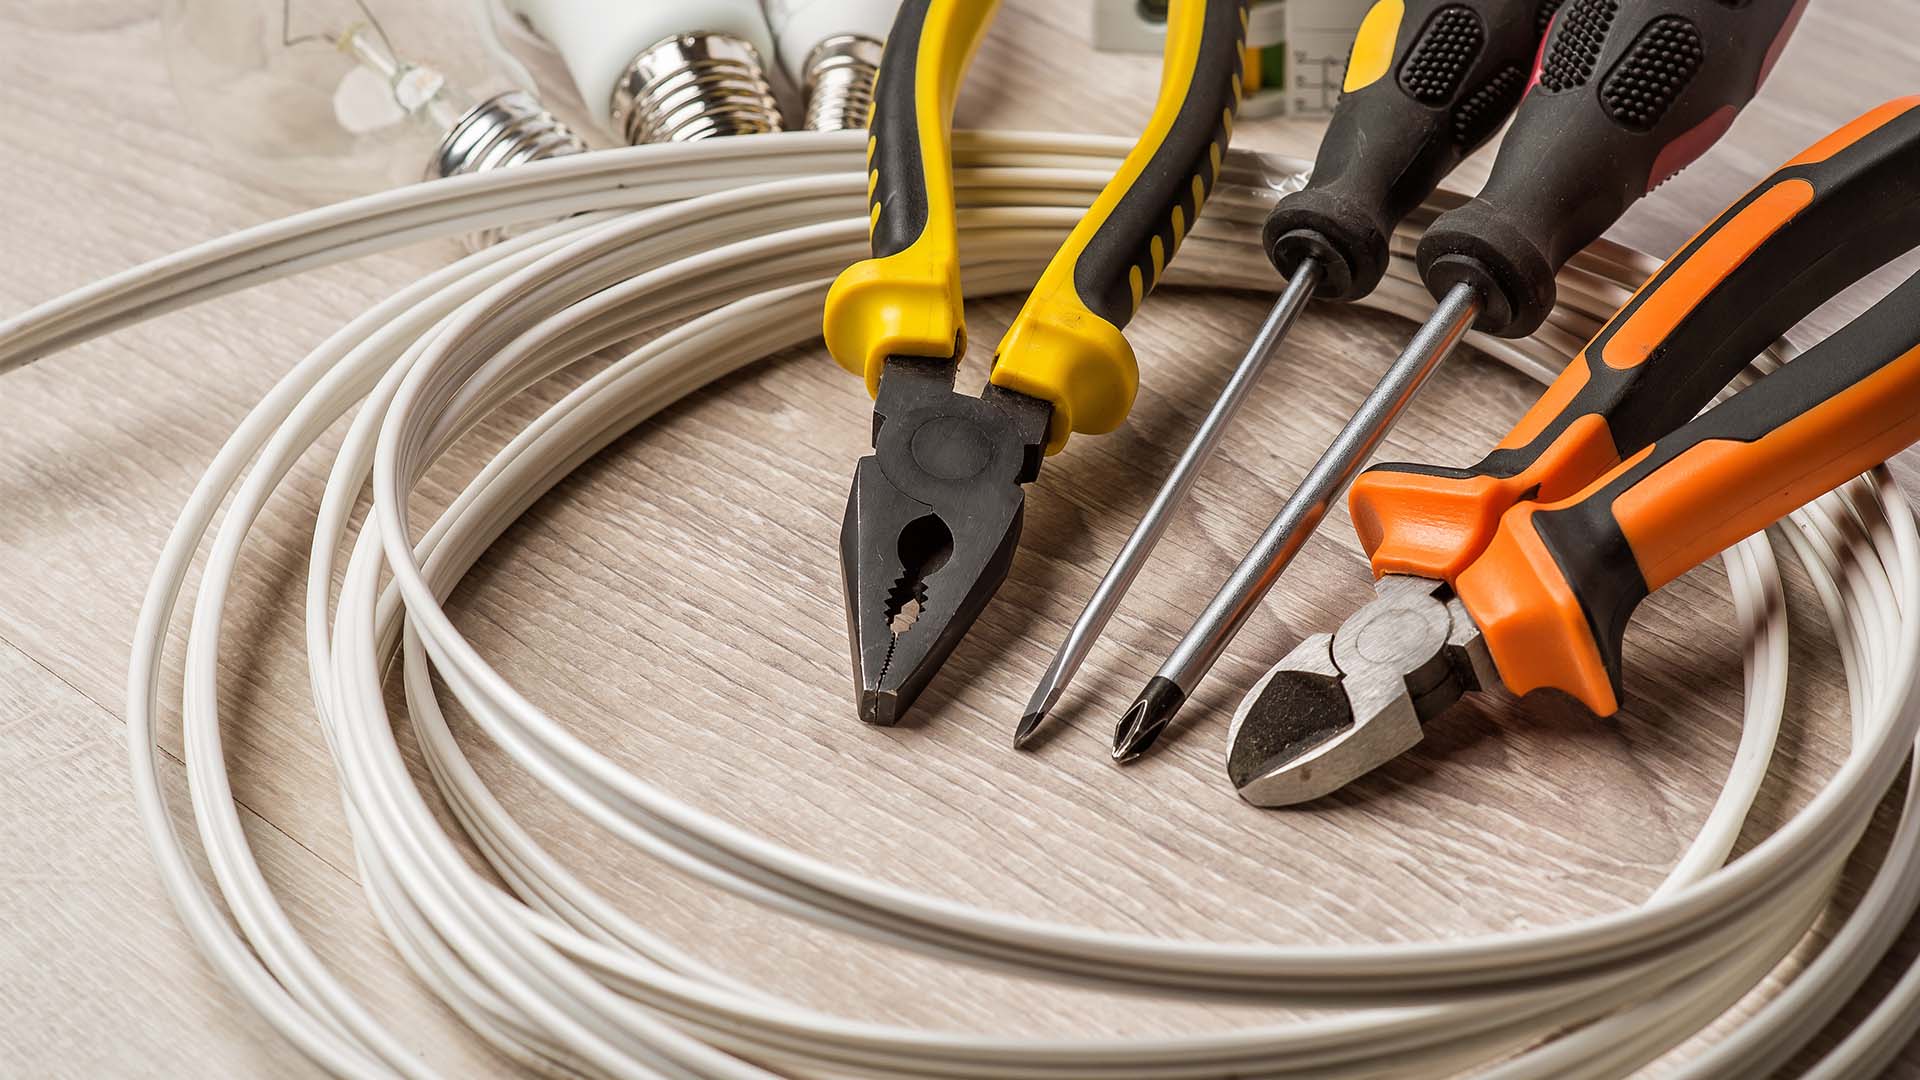 Featured image for “7 Must Have Tools for Appliance Repair”